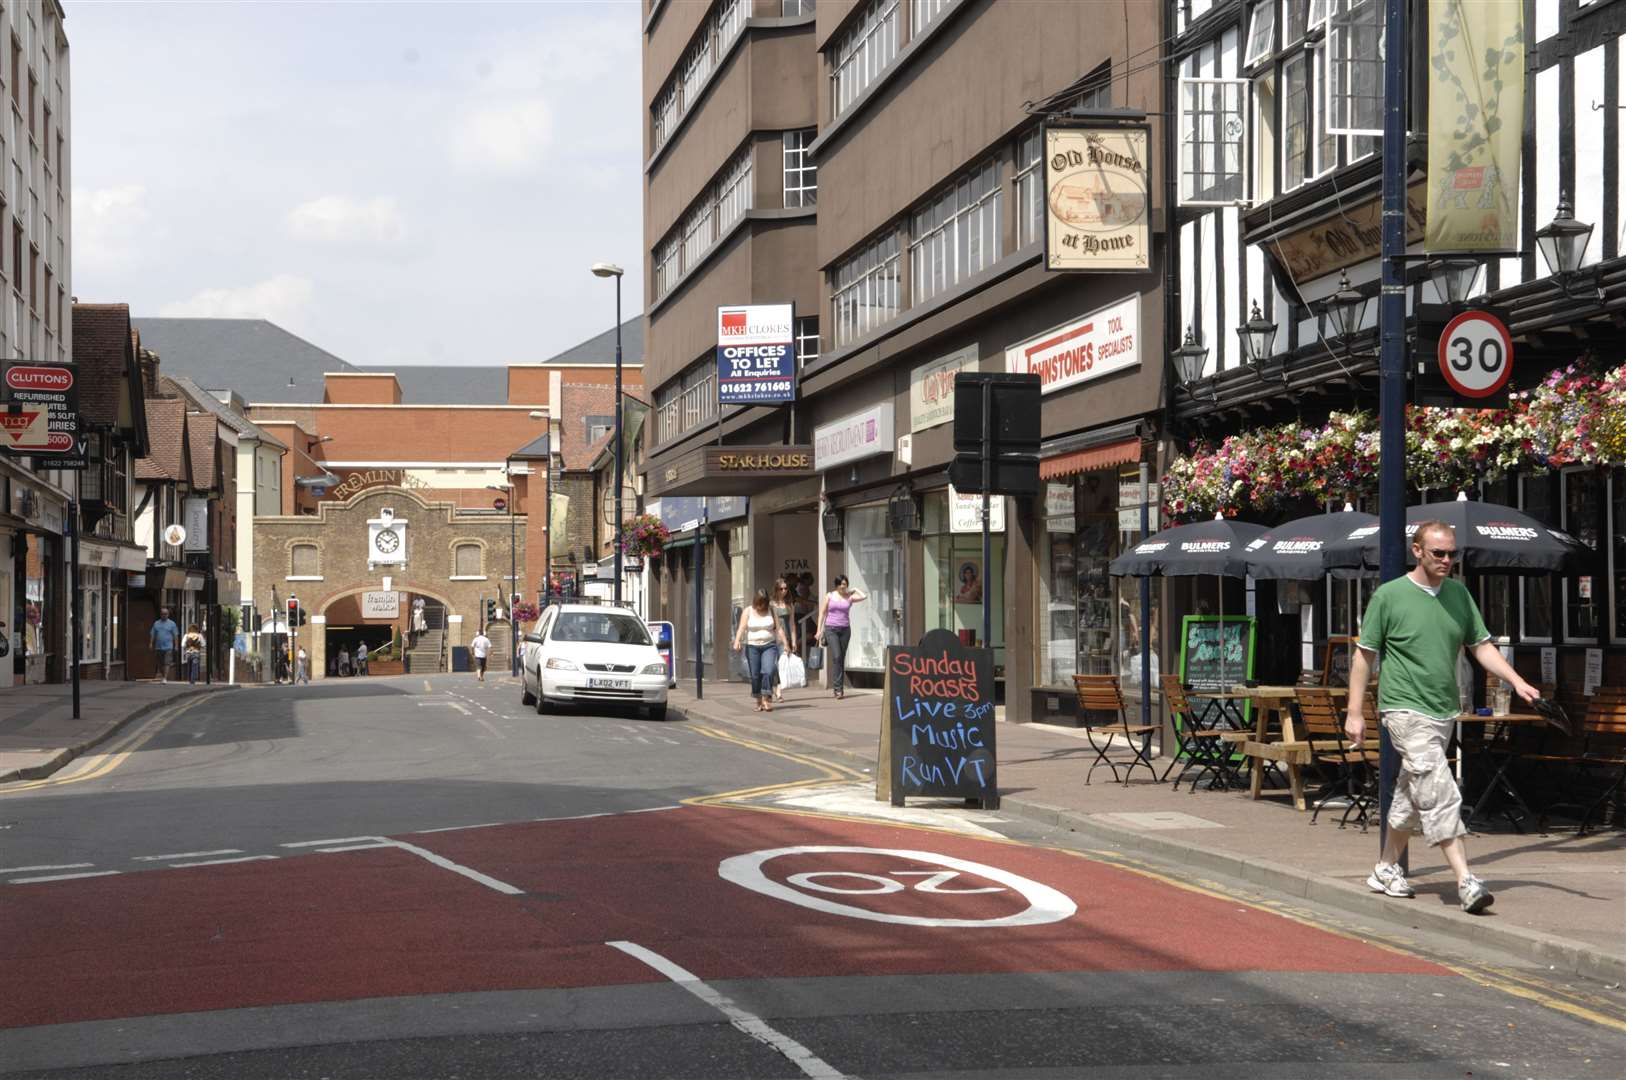 The attack happened in Pudding Lane, Maidstone